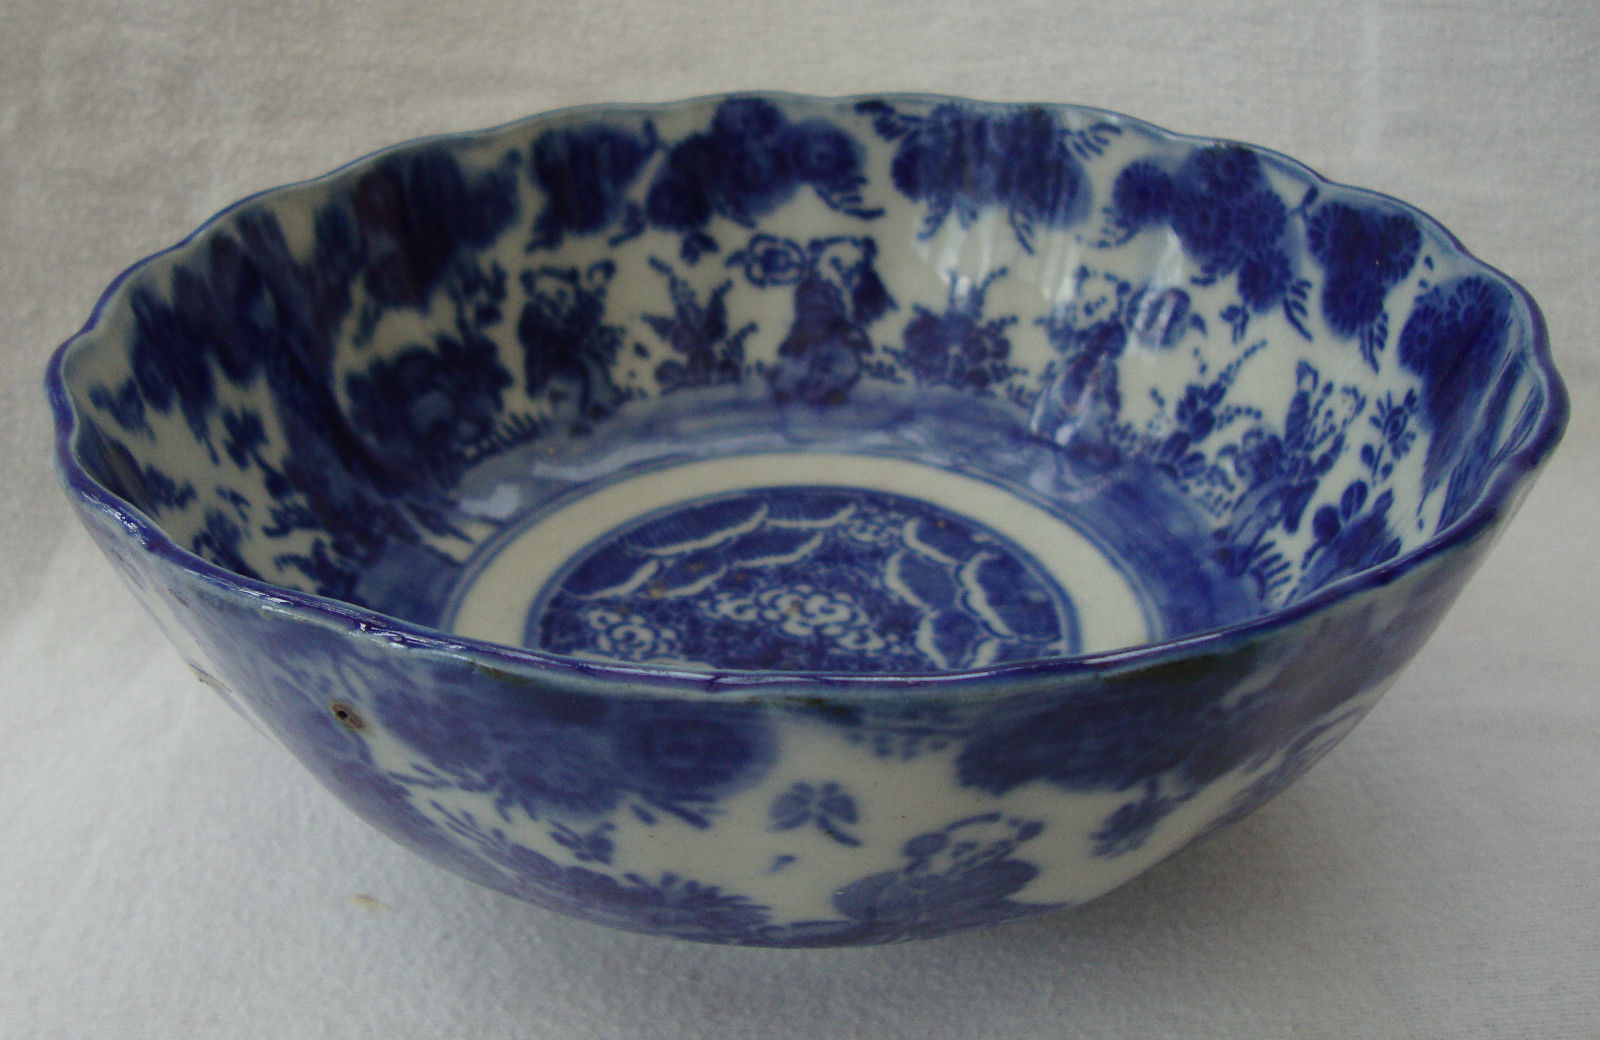 ANTIQUE FLOW BLUE & WHITE PAINTED CHINESE LARGE BOWL IMMORTALS PEOPLE & FOLIAGE